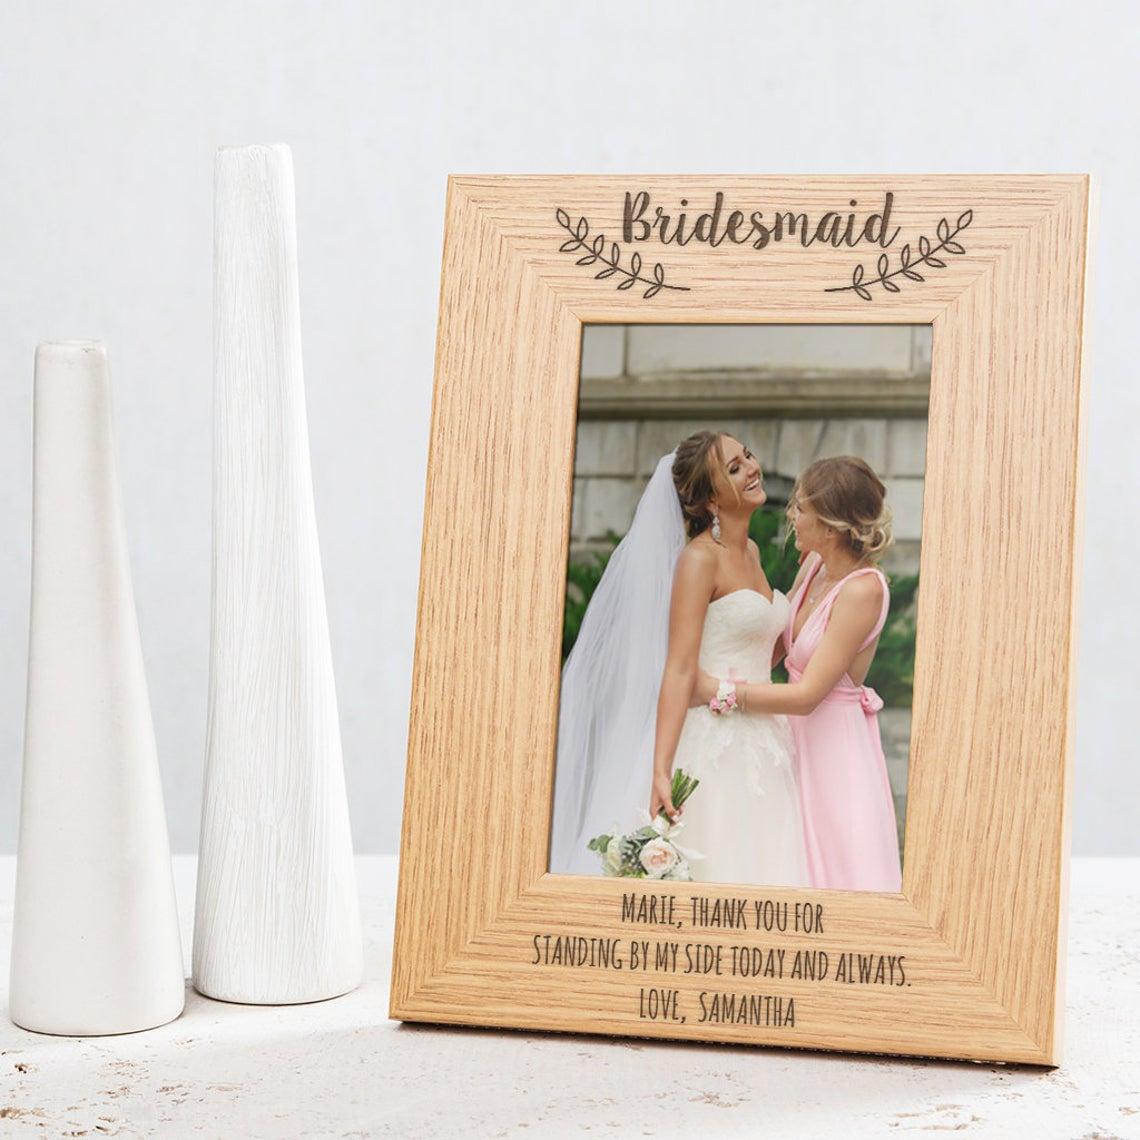 Personalised Vintage Bridesmaid Photo Frame Wedding Party Gift ANY WORDING 